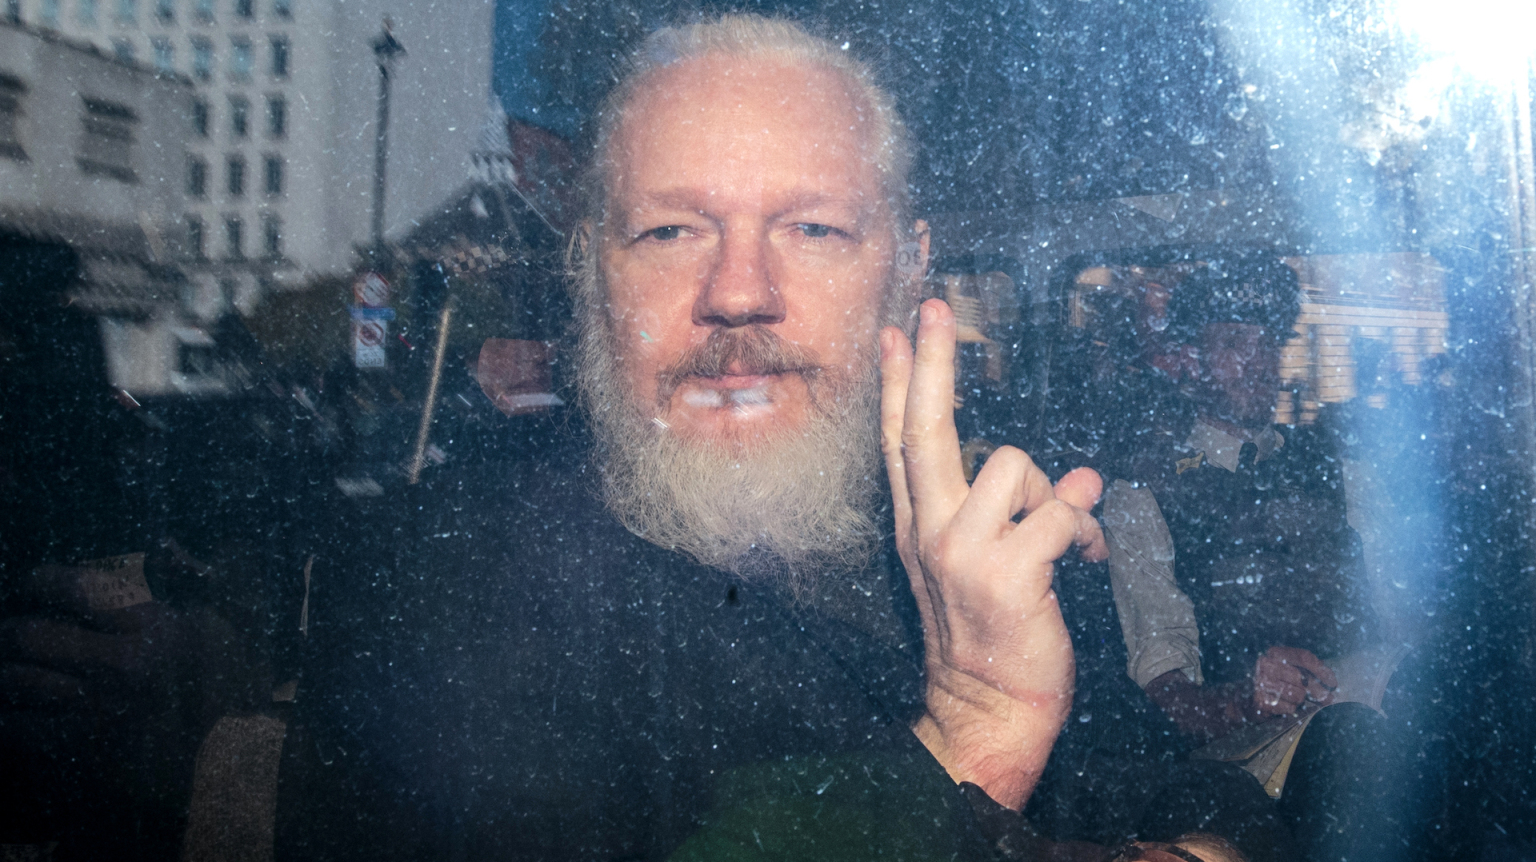 Julian Assange gestures to the media from a police vehicle on April 11, 2019 in London.